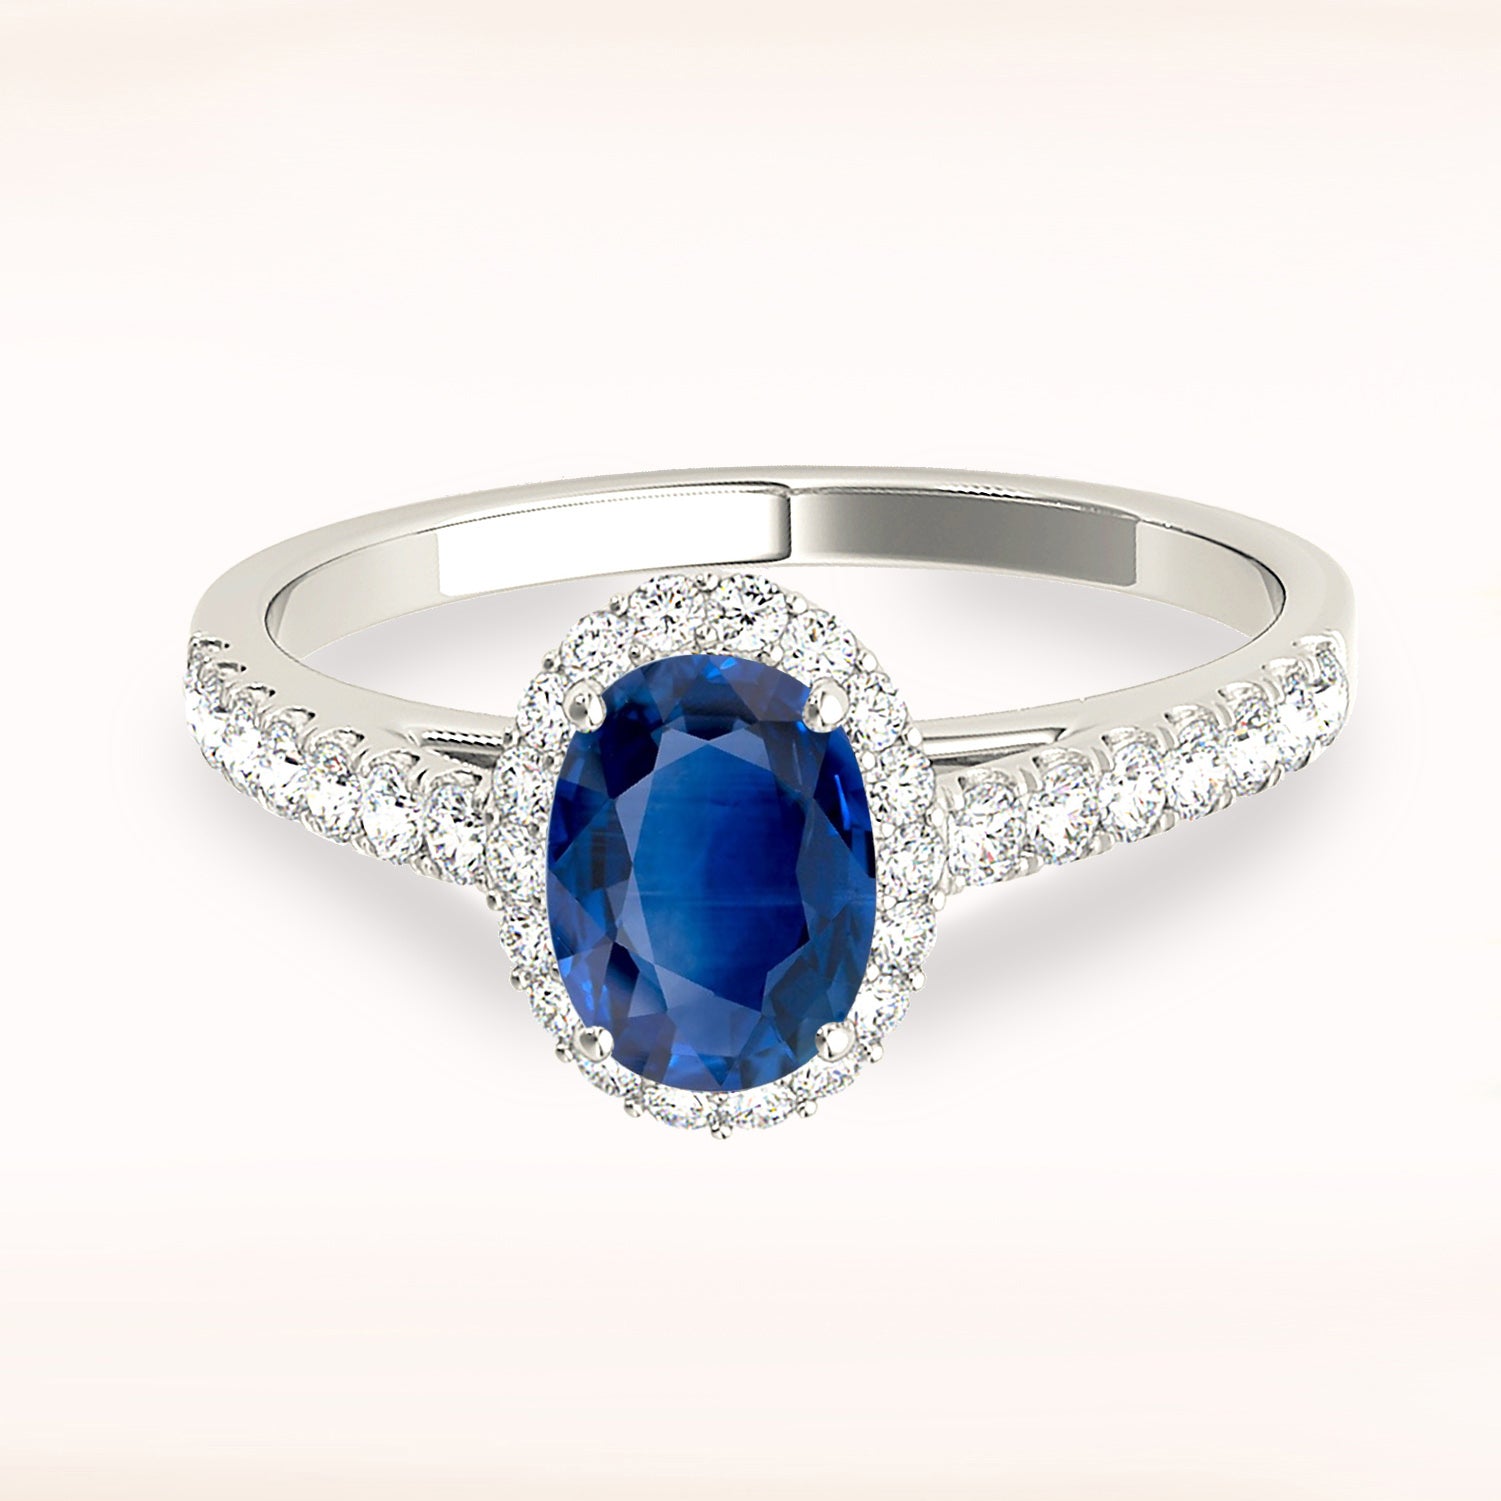 1.51 ct. Genuine Blue Oval Sapphire Ring With 0.25 ctw. Diamond Halo, Dainty Diamond band | Natural Sapphire And Diamond Gemstone Ring-in 14K/18K White, Yellow, Rose Gold and Platinum - Christmas Jewelry Gift -VIRABYANI